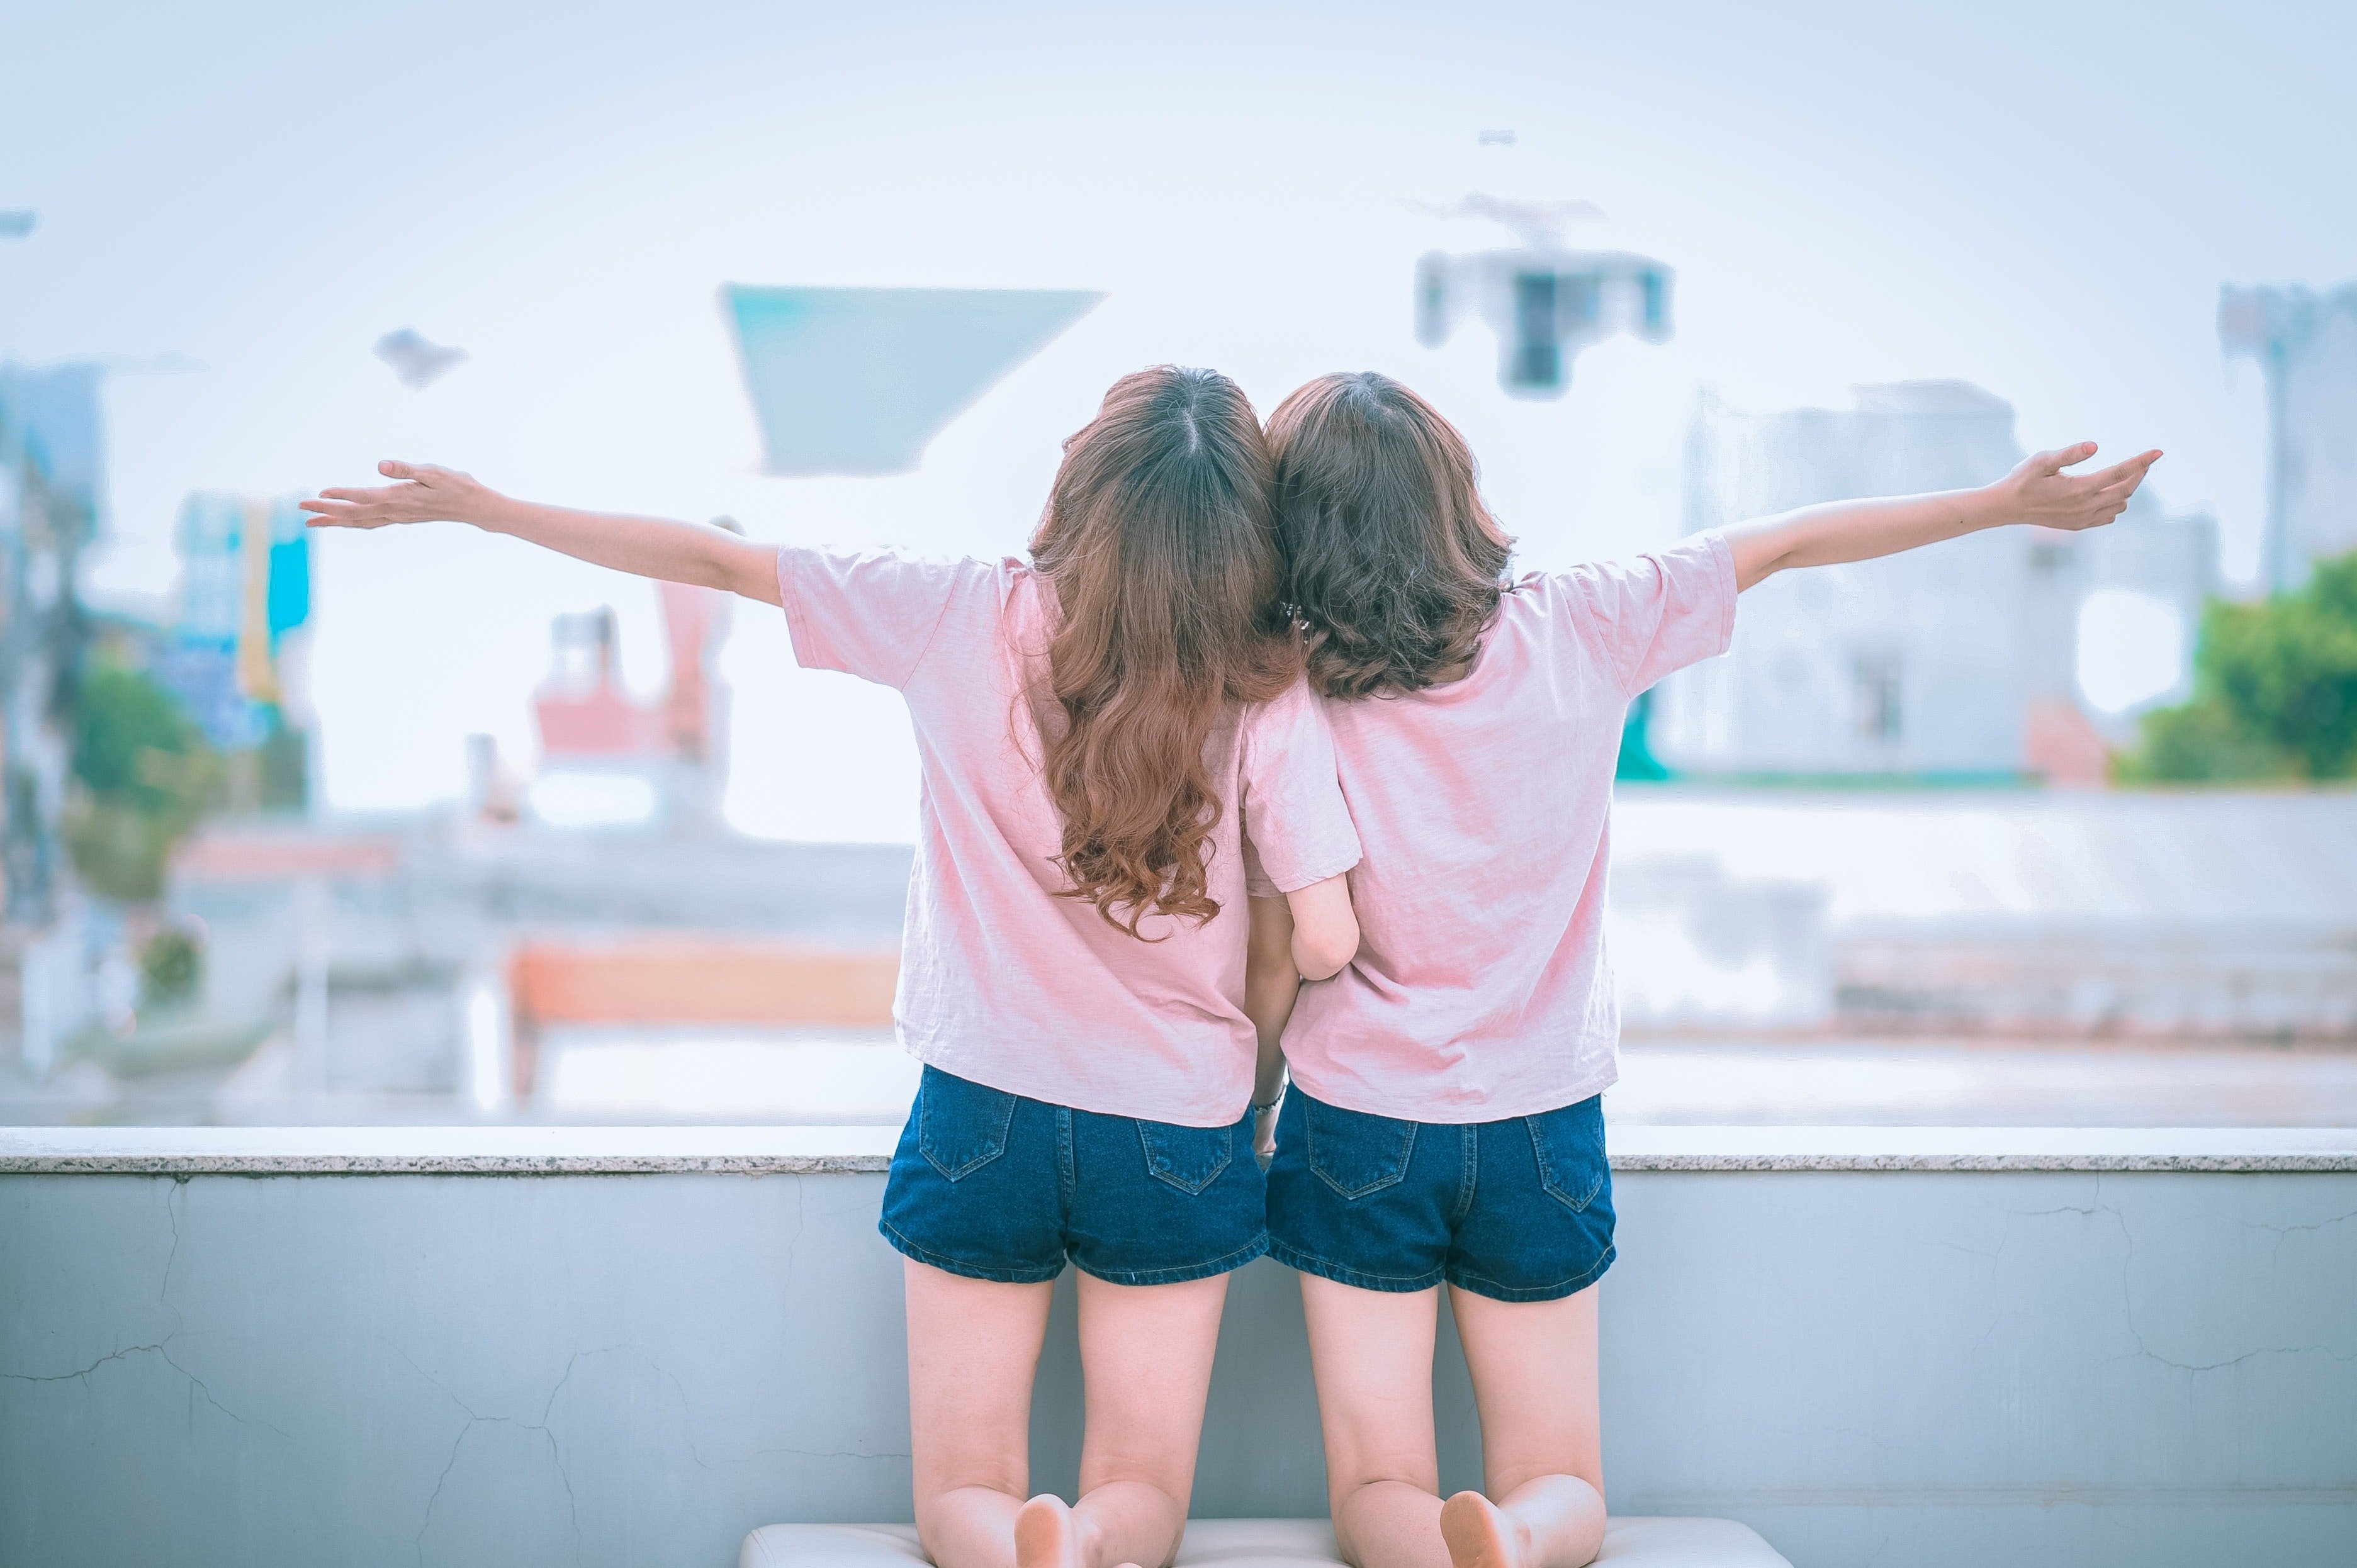 An image of young twin girls | Photo: Pexels